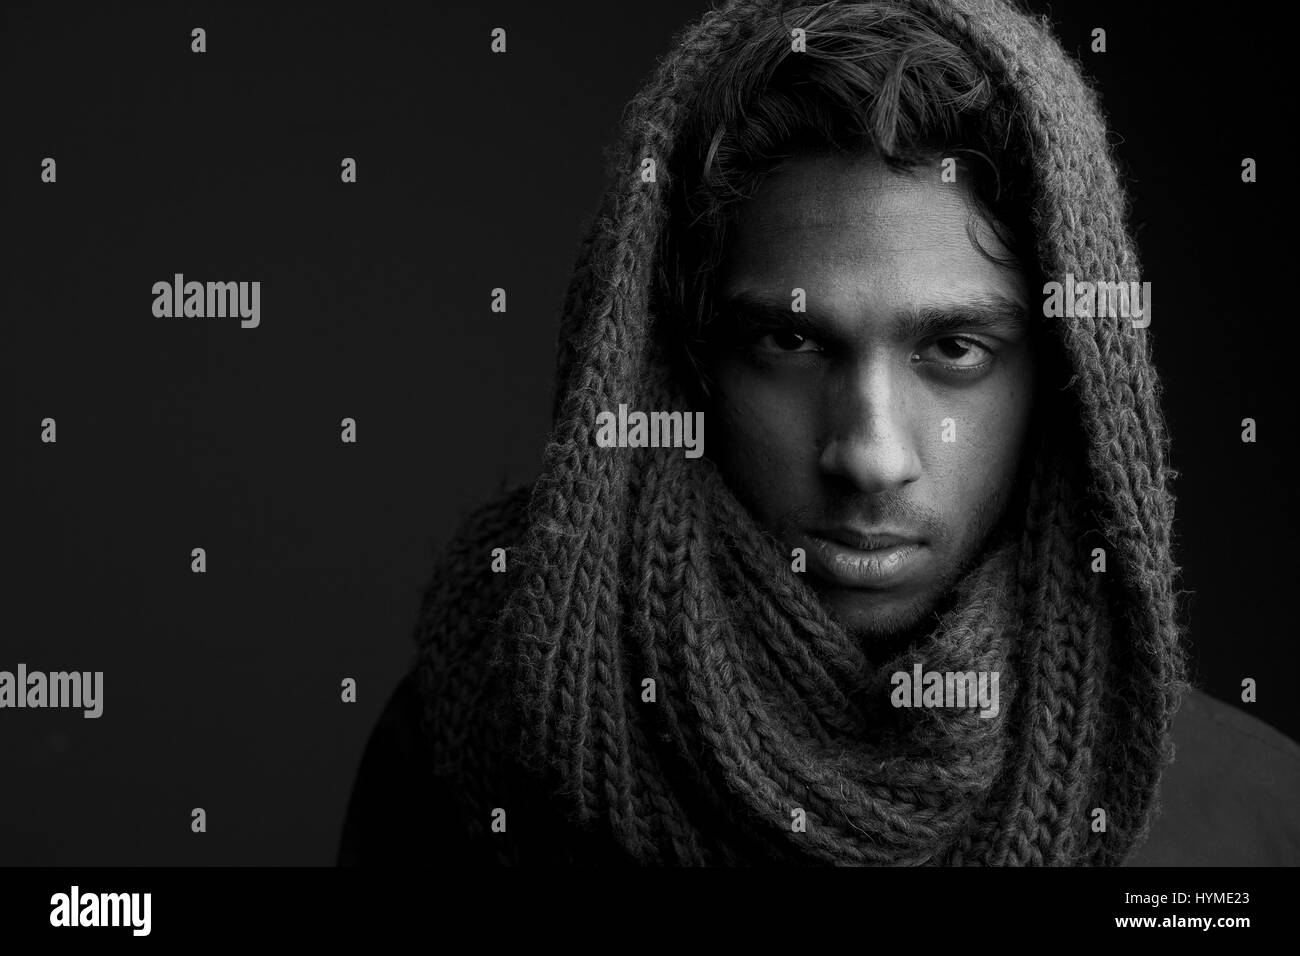 Black and white portrait of a young man with wool scarf covering head Stock Photo